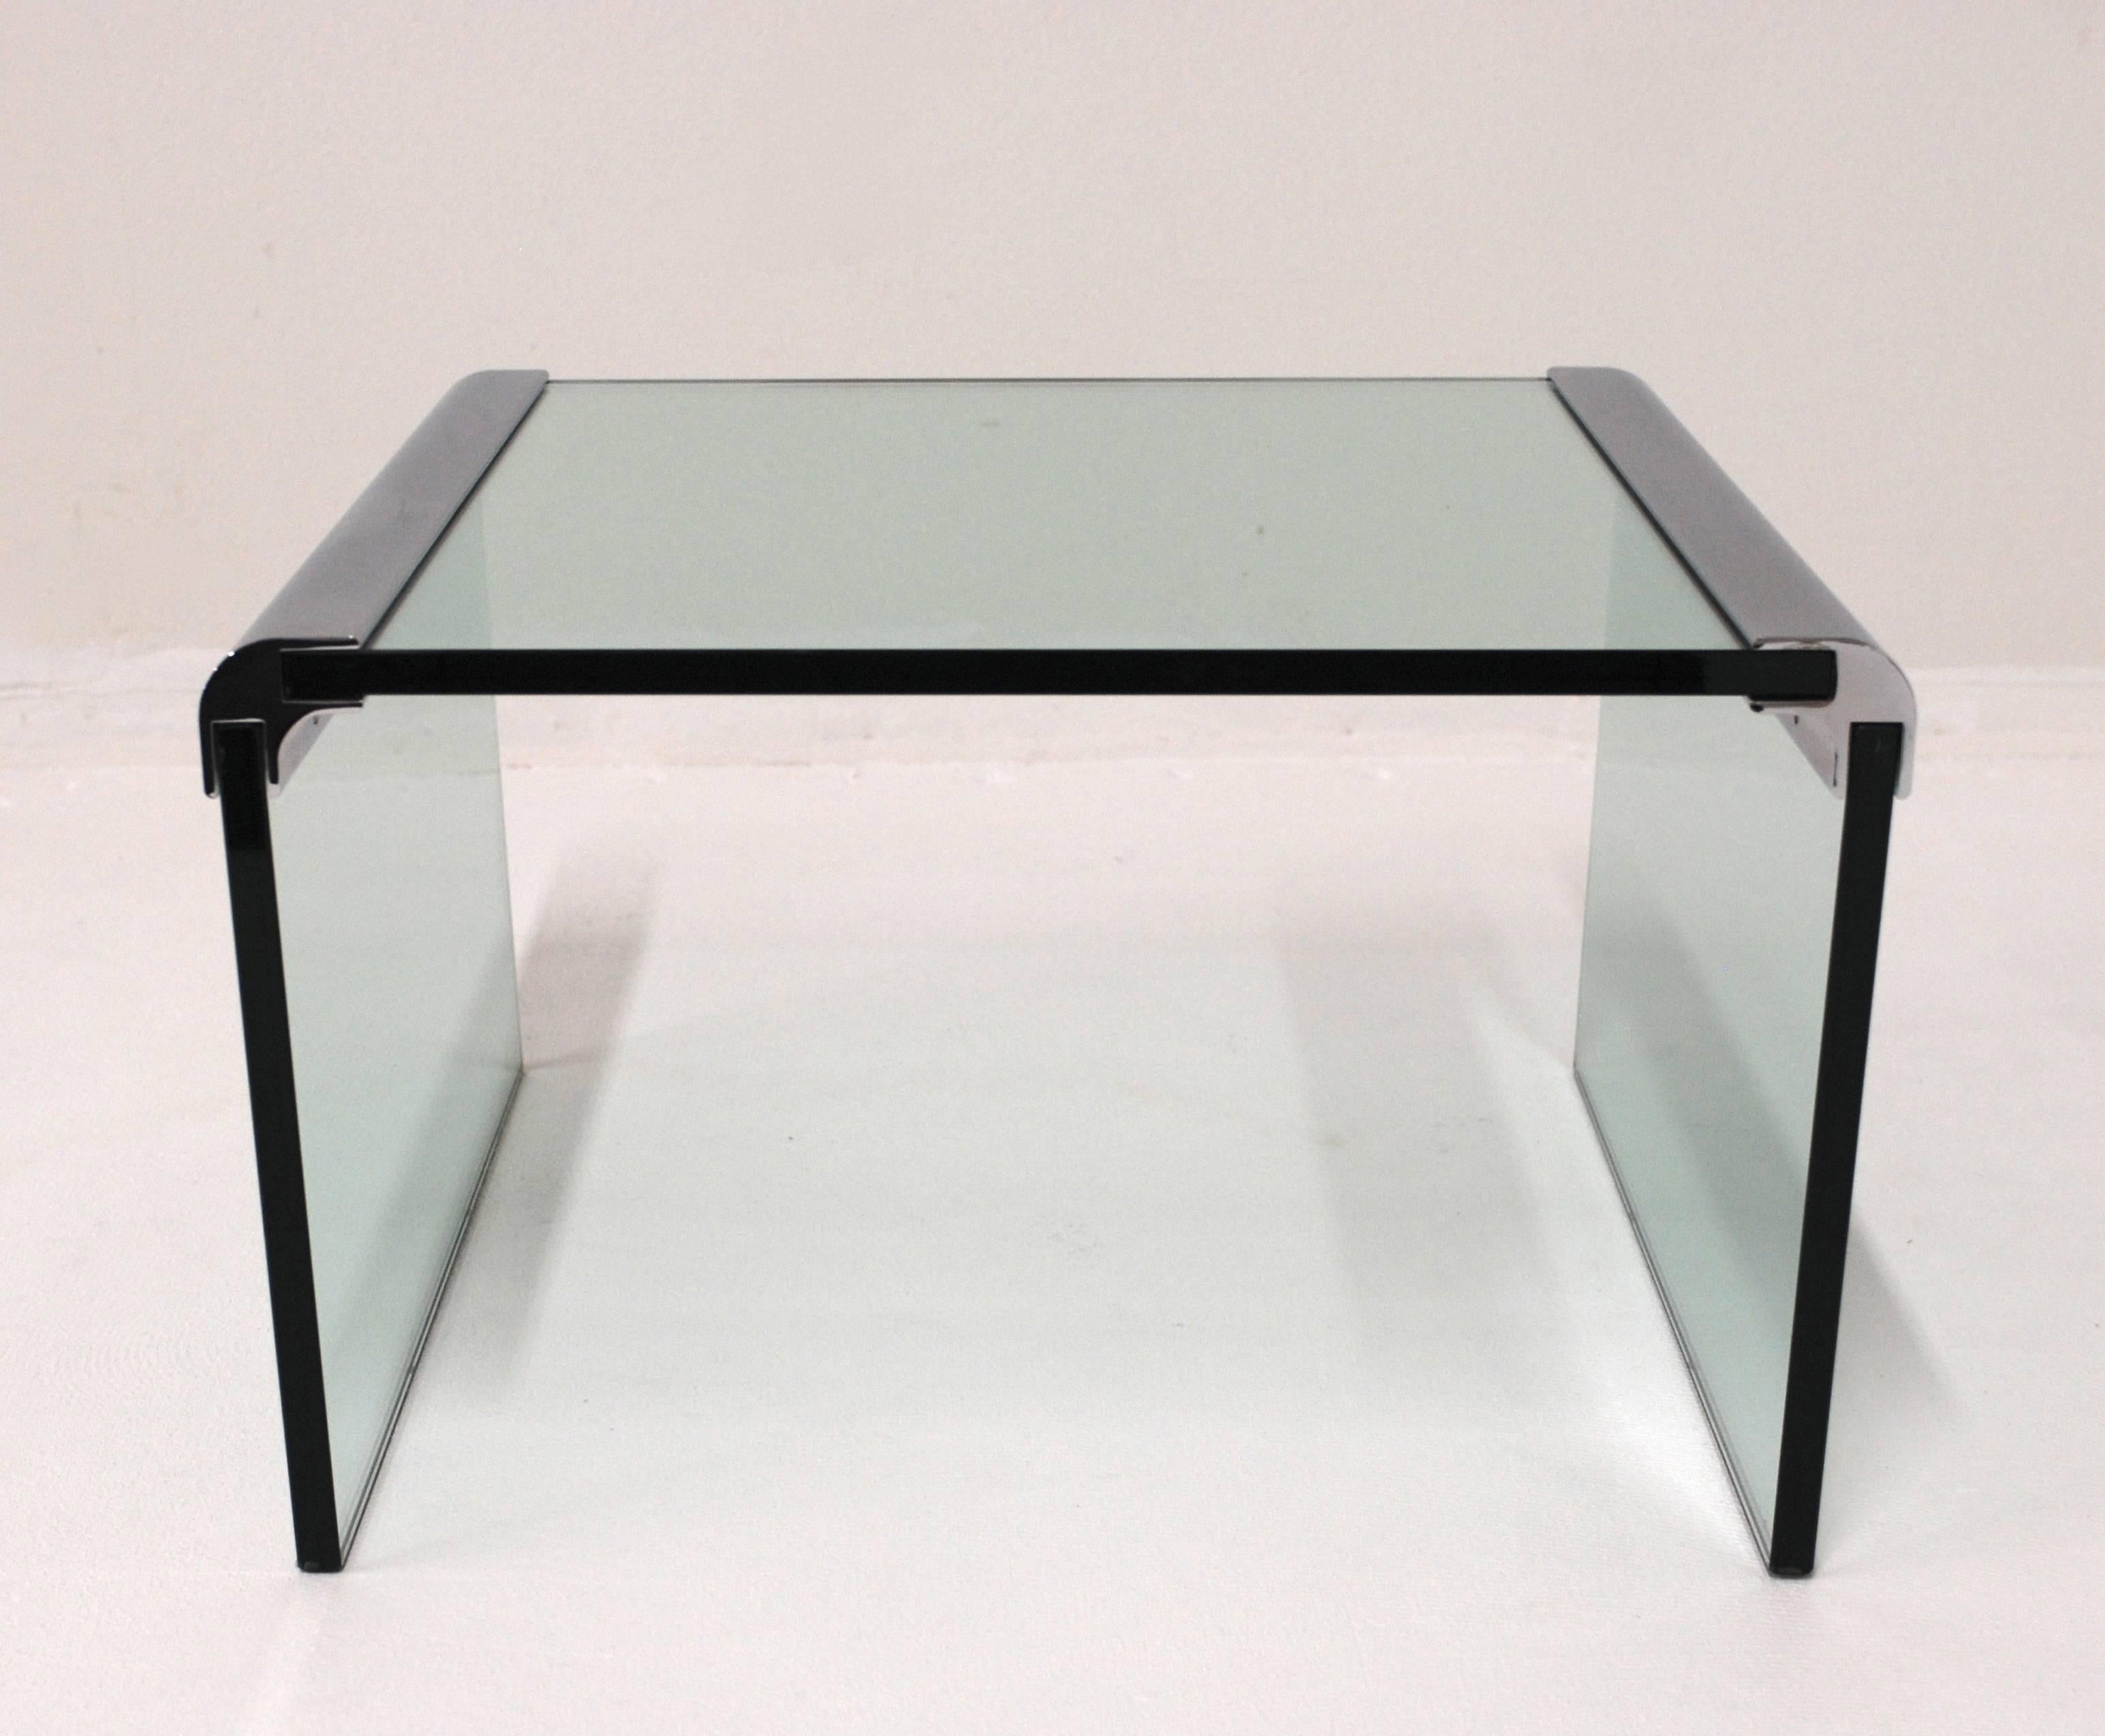 A Leon Rosen for Pace Side table that is in excellent condition.  The table consists of three sheets of 3/4" glass held together by chromed bars.  We have a pair of matching smaller side tables that work with this table to make a set, see last